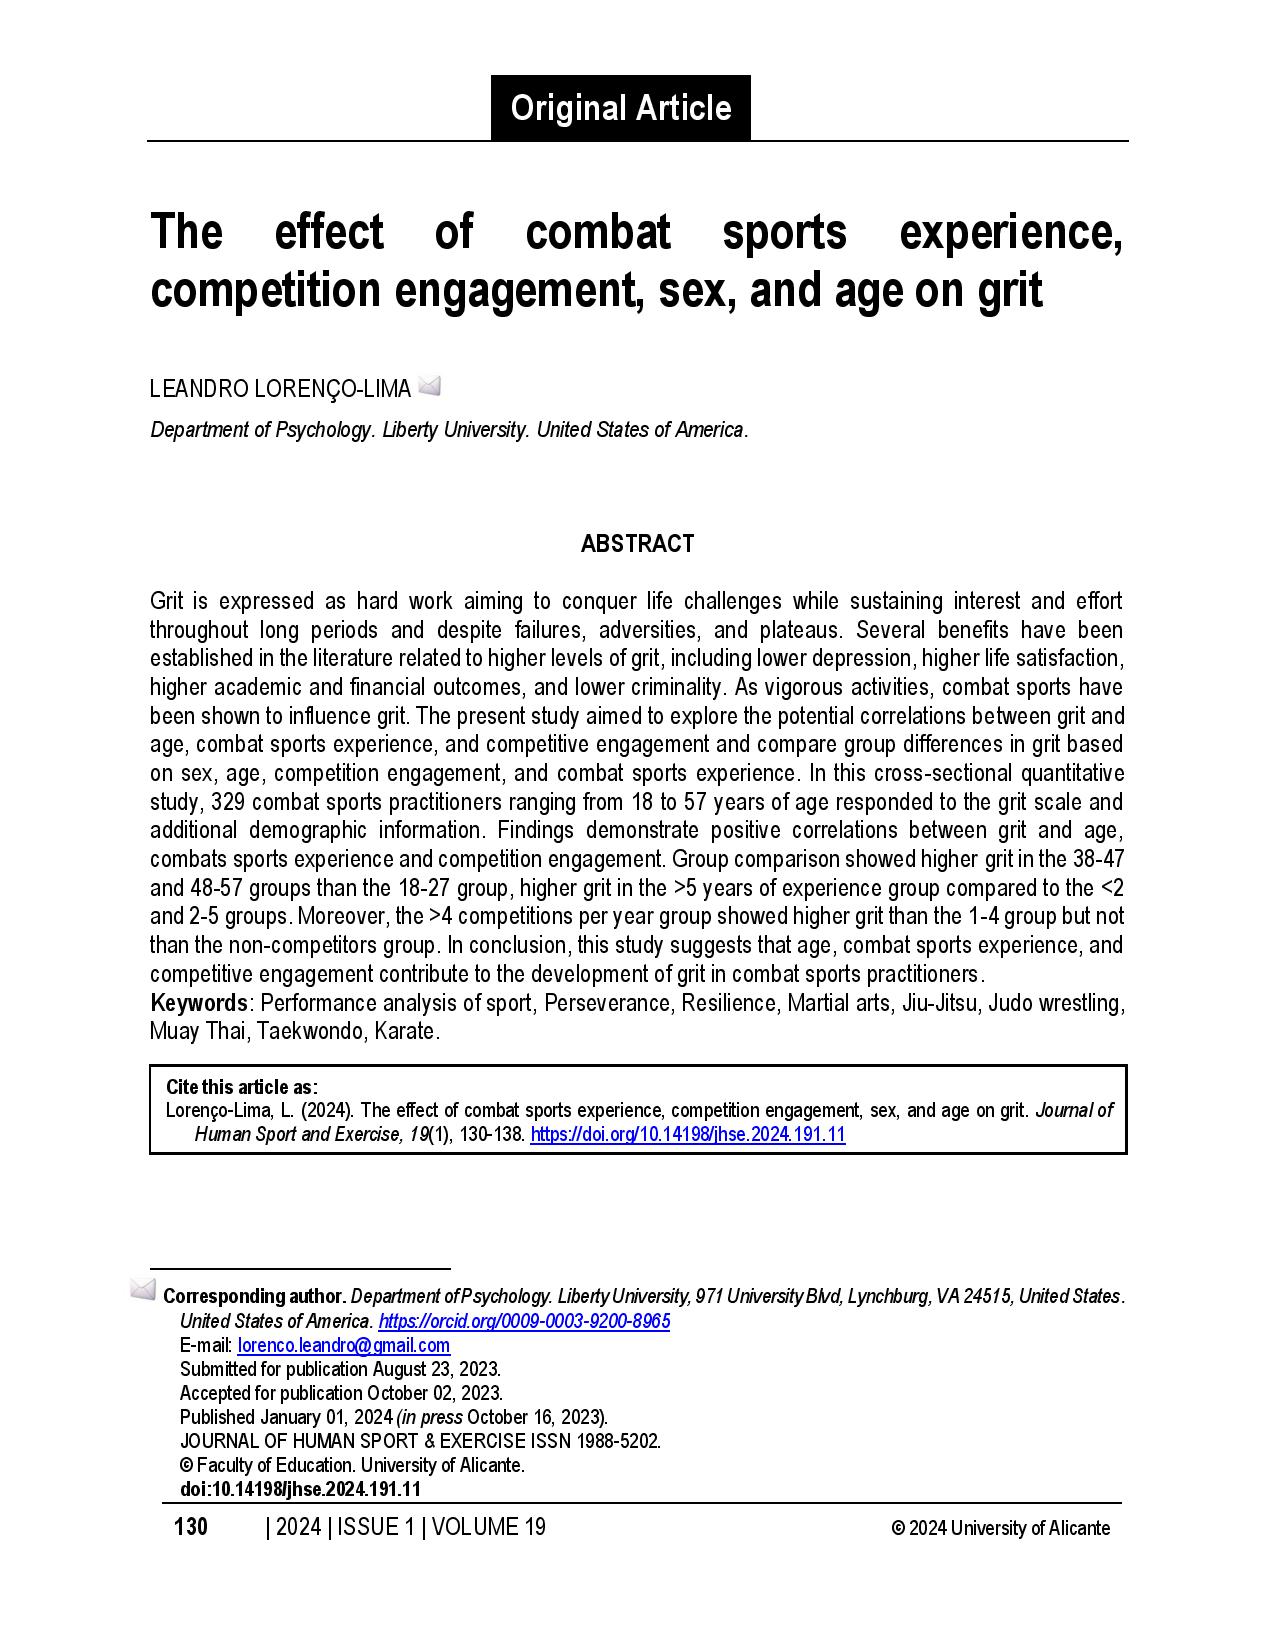 The effect of combat sports experience, competition engagement, sex, and age on grit